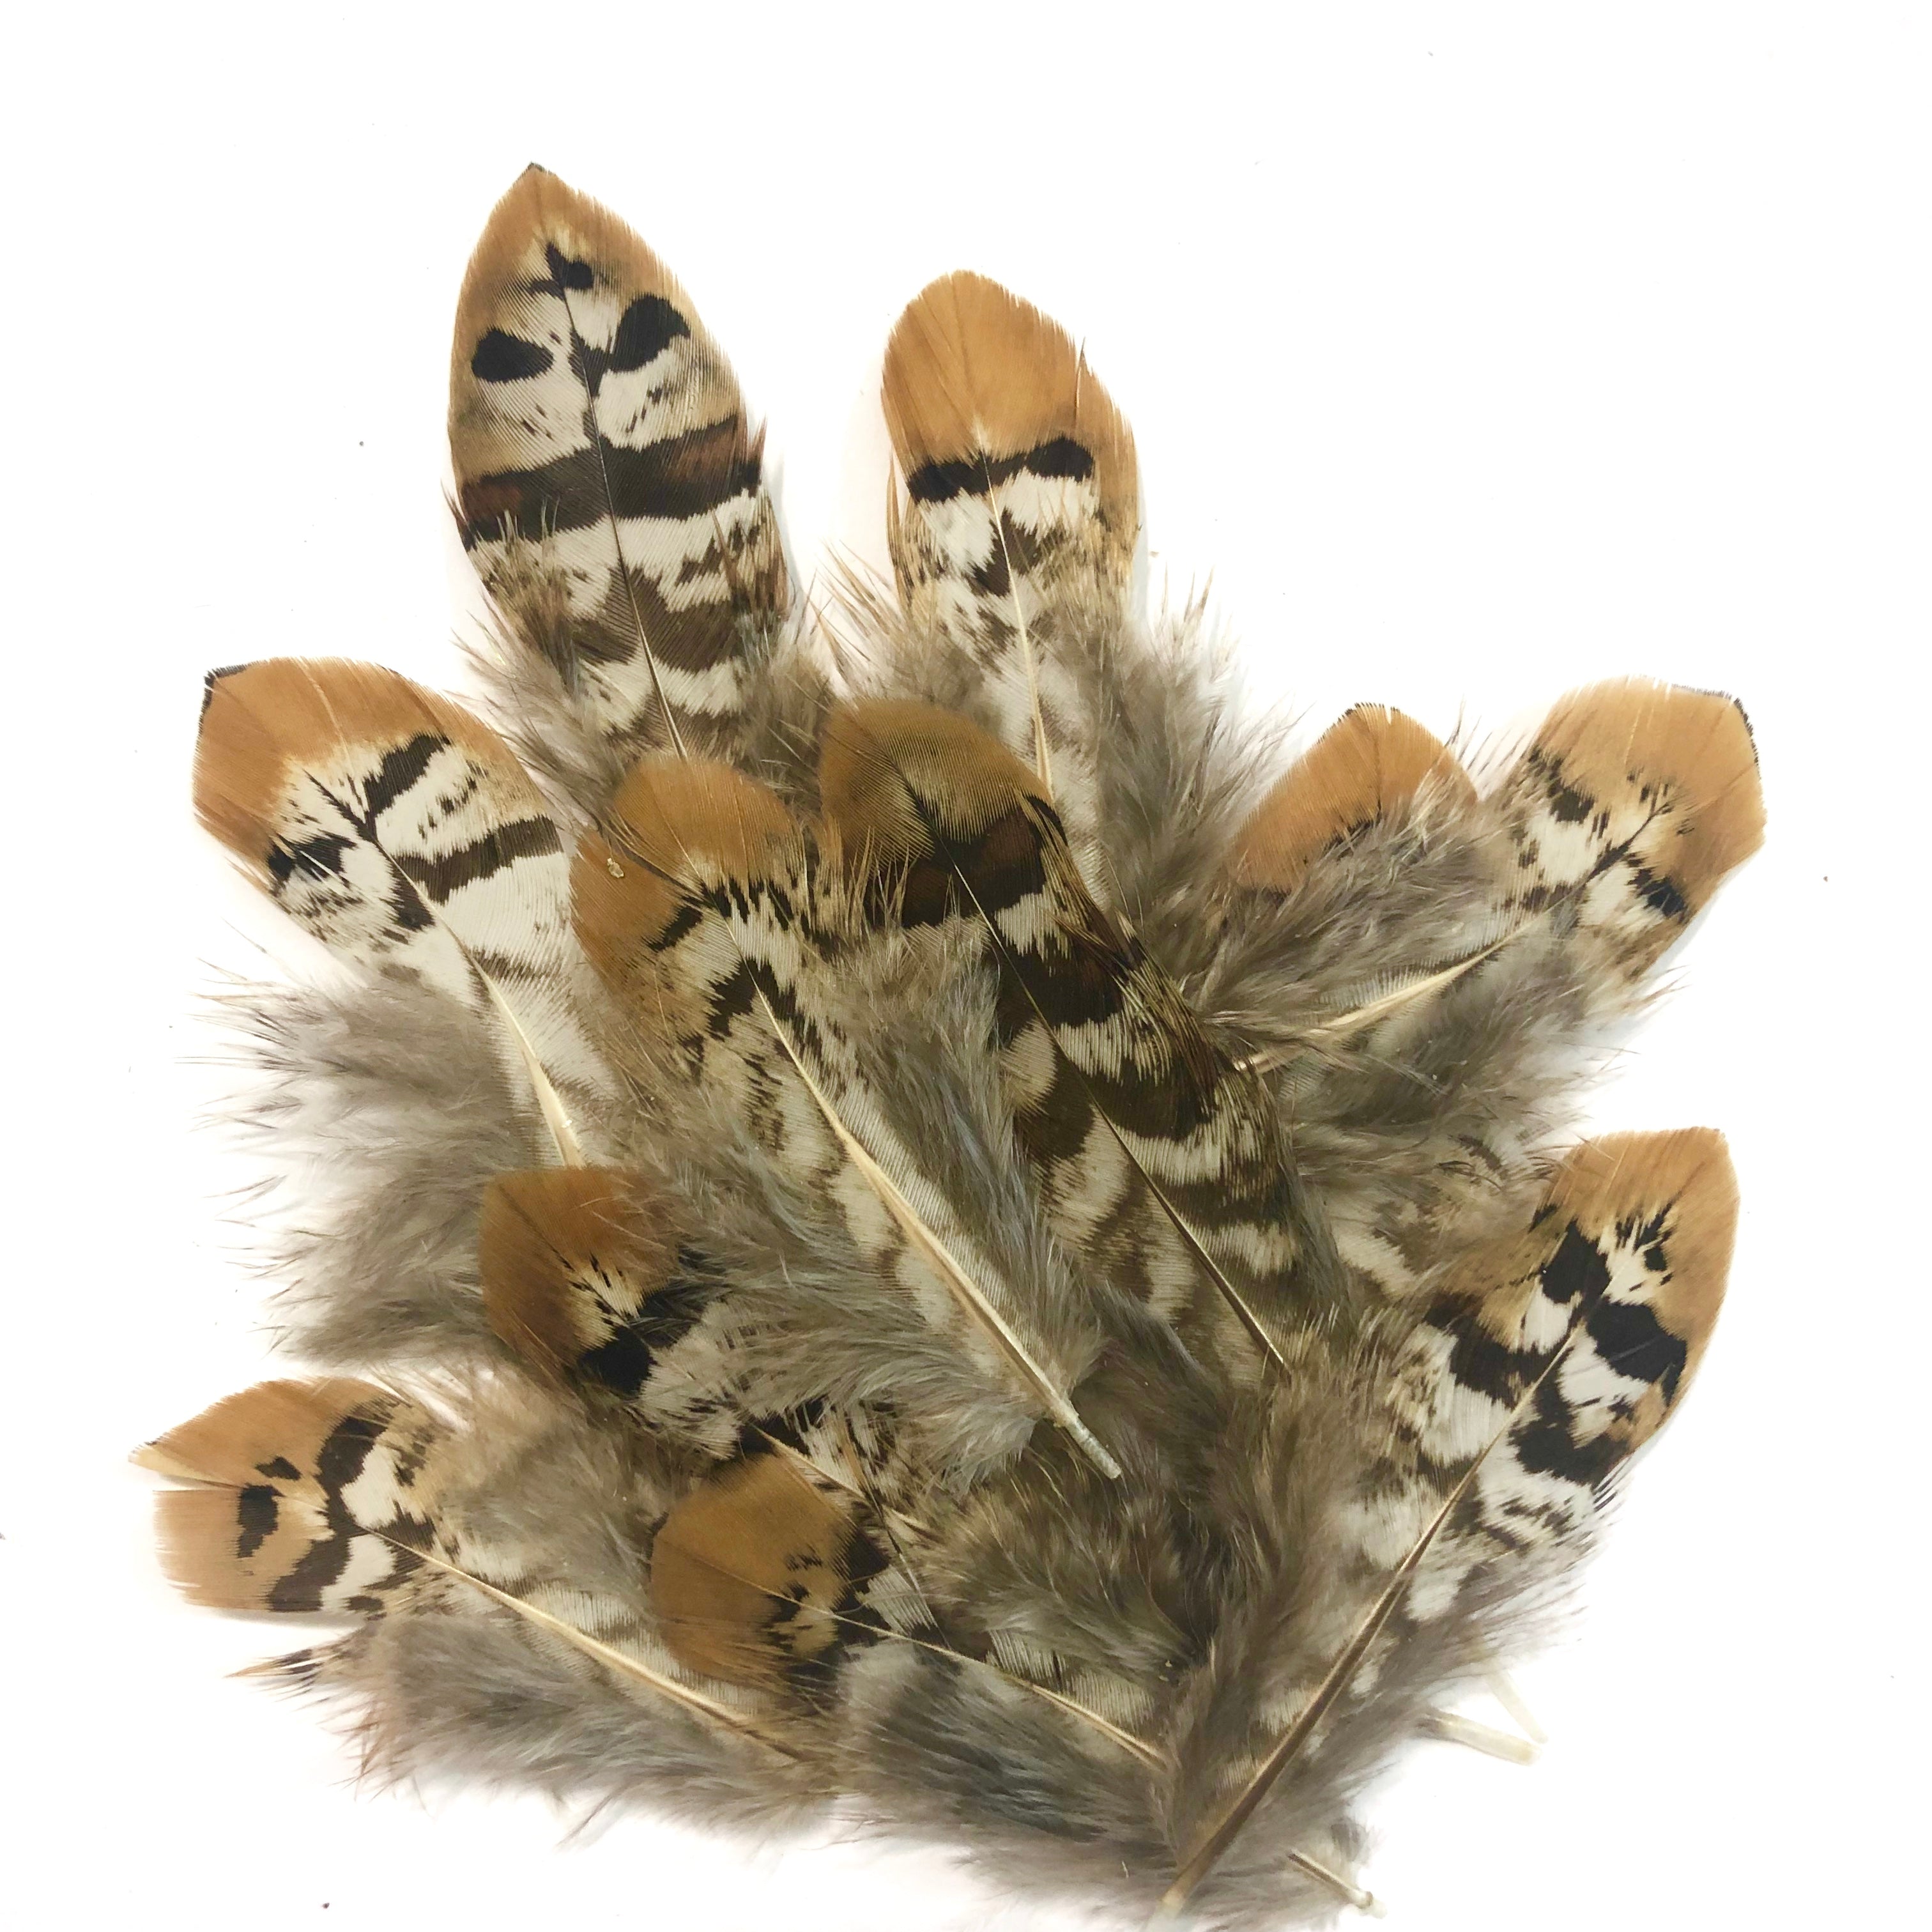 Natural Reeves Pheasant Plumage Feathers x 10pcs